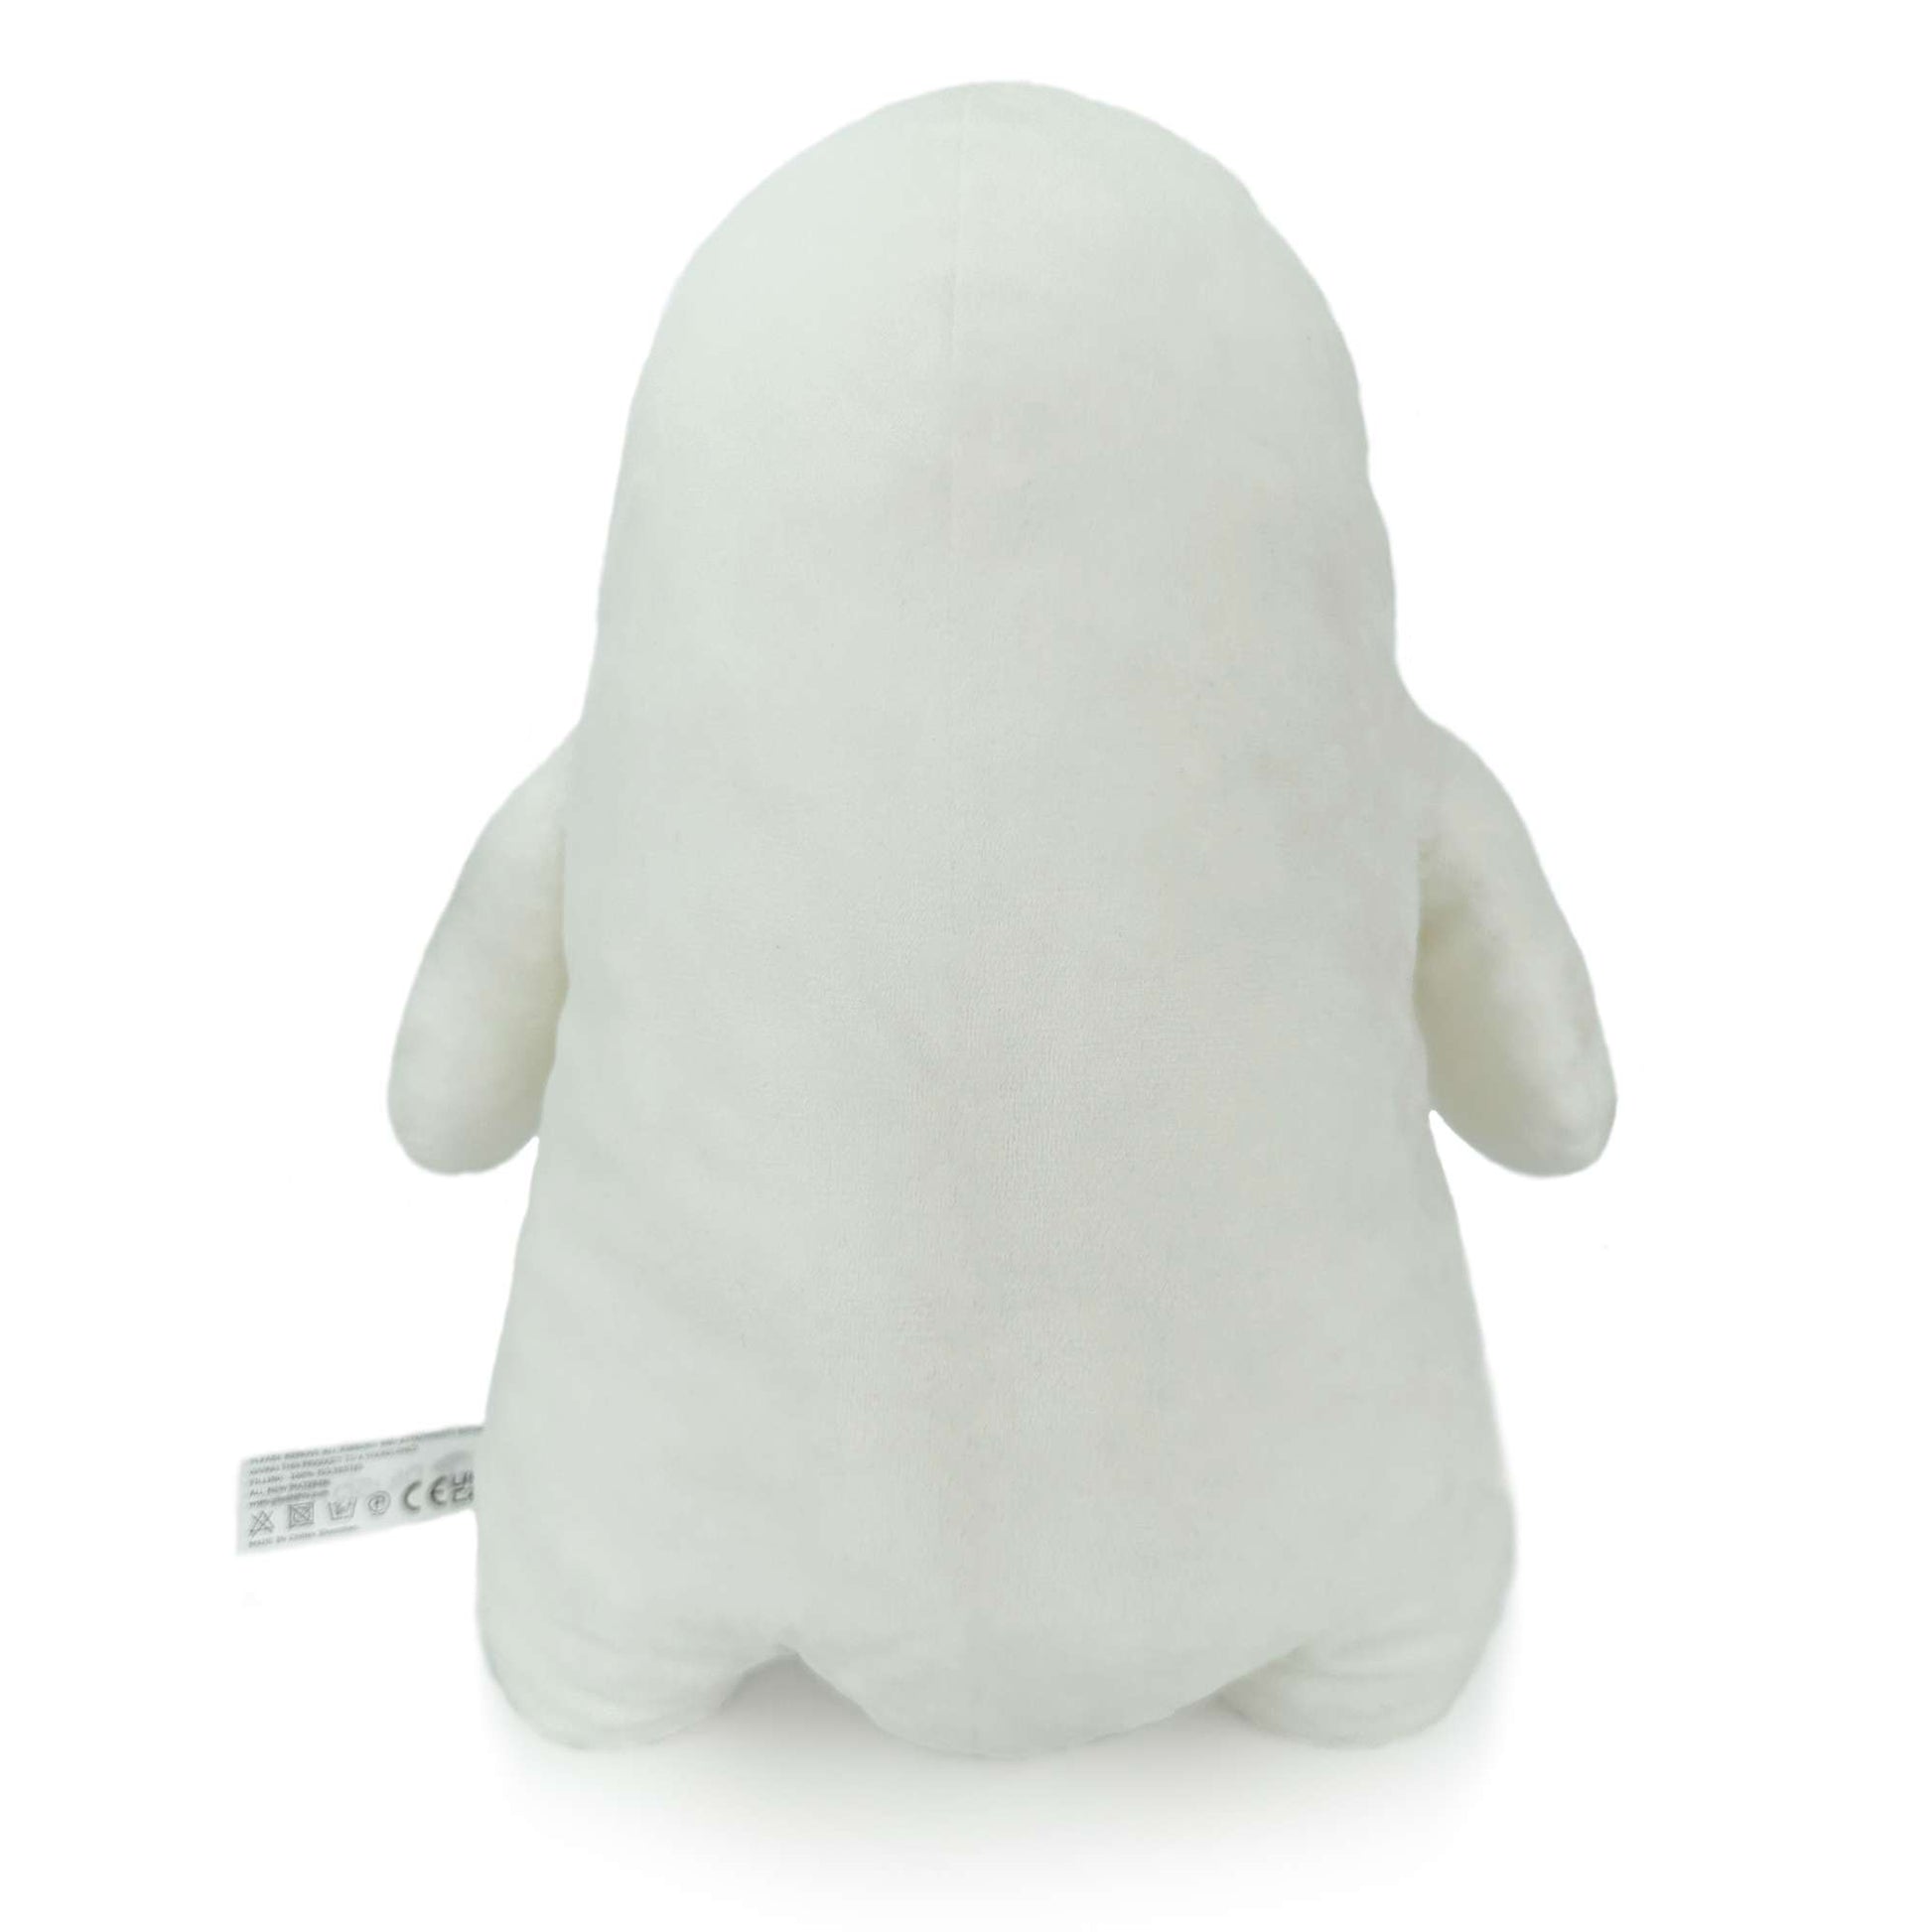 Ghost plush toy for Halloween back view